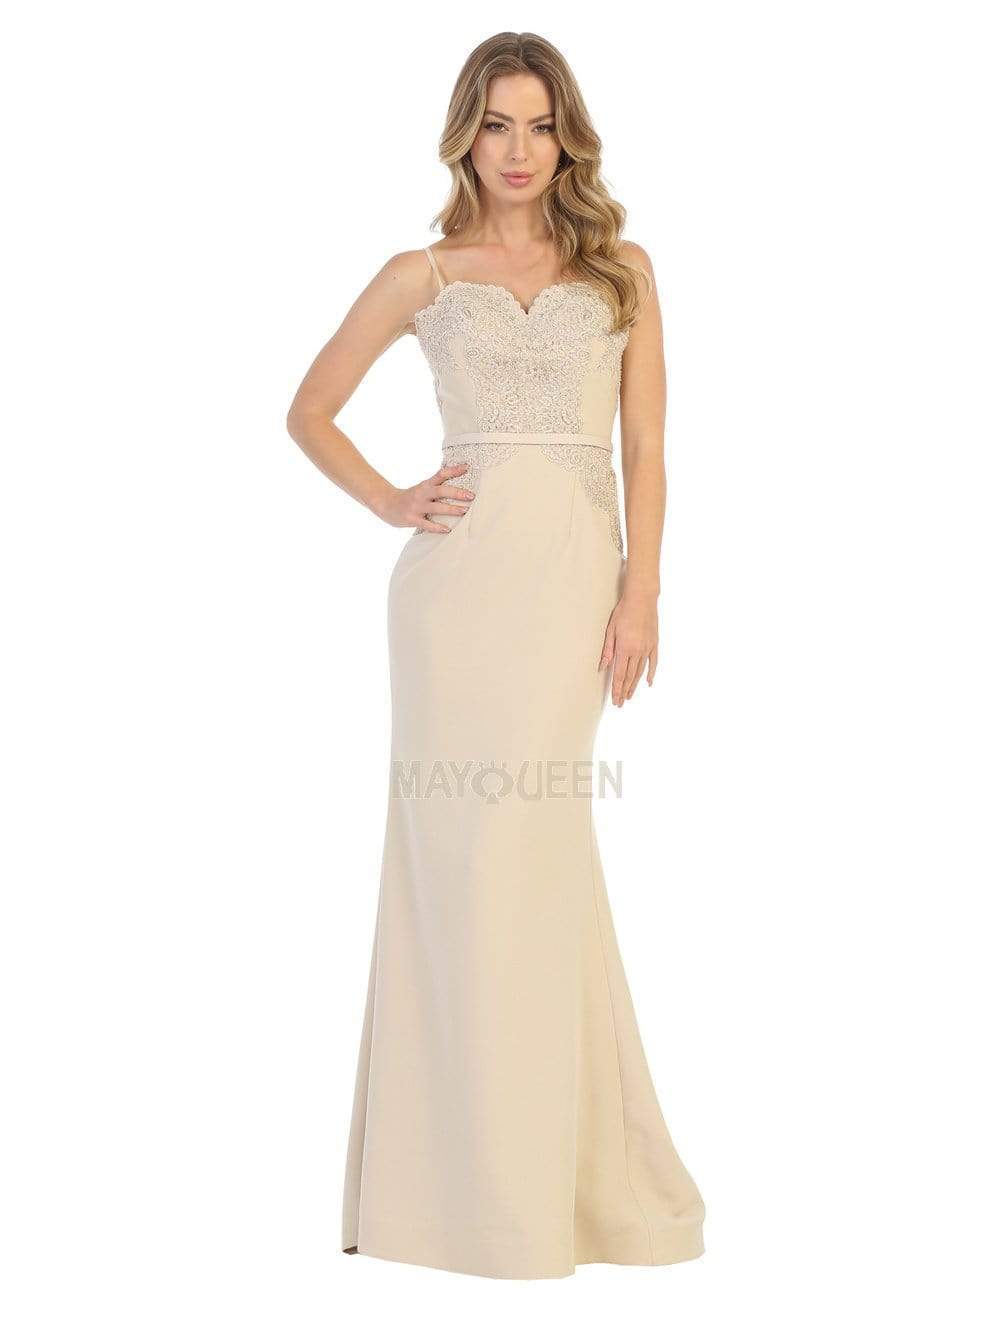 Image of May Queen - MQ1759 Scallop Lace Appliqued Sweetheart Bodice Dress